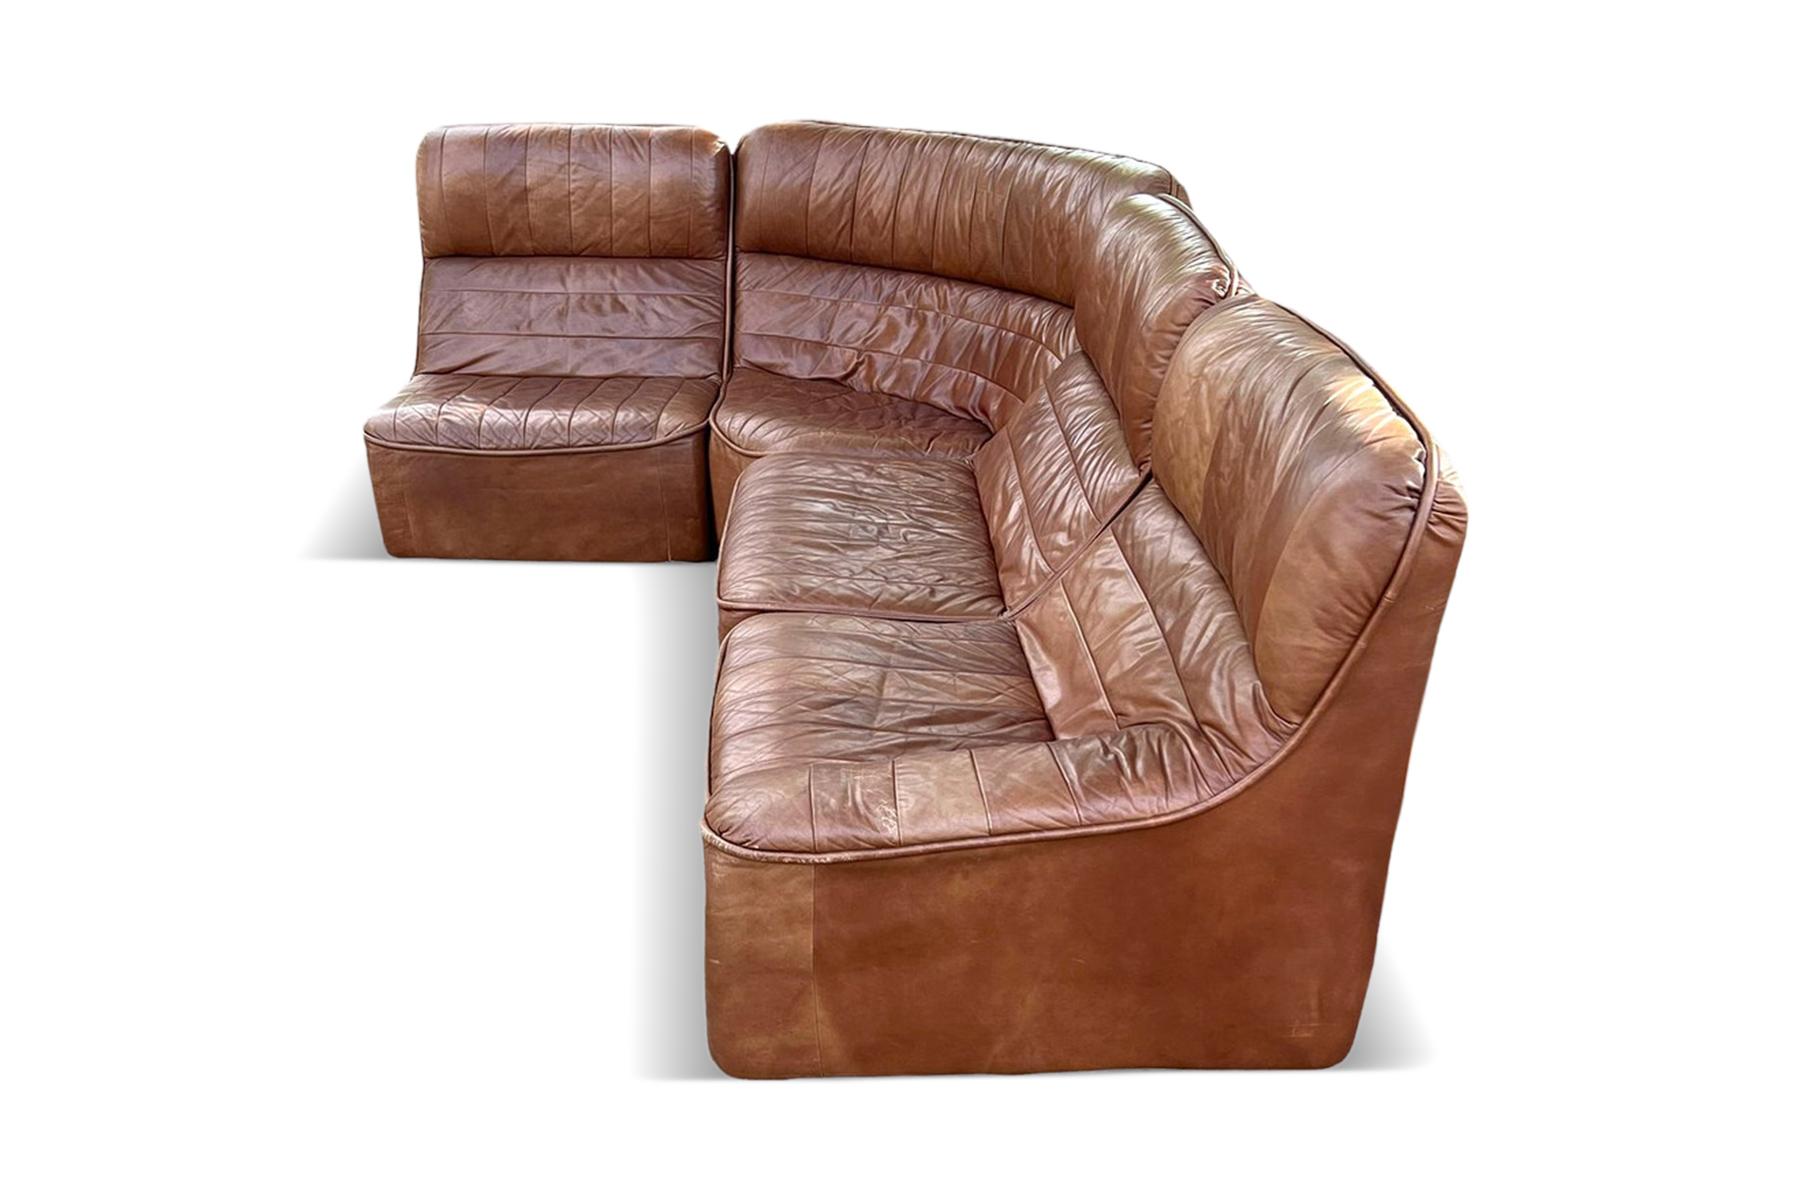 20th Century 1970s Modular Leather Sofa in Cognac Leather For Sale